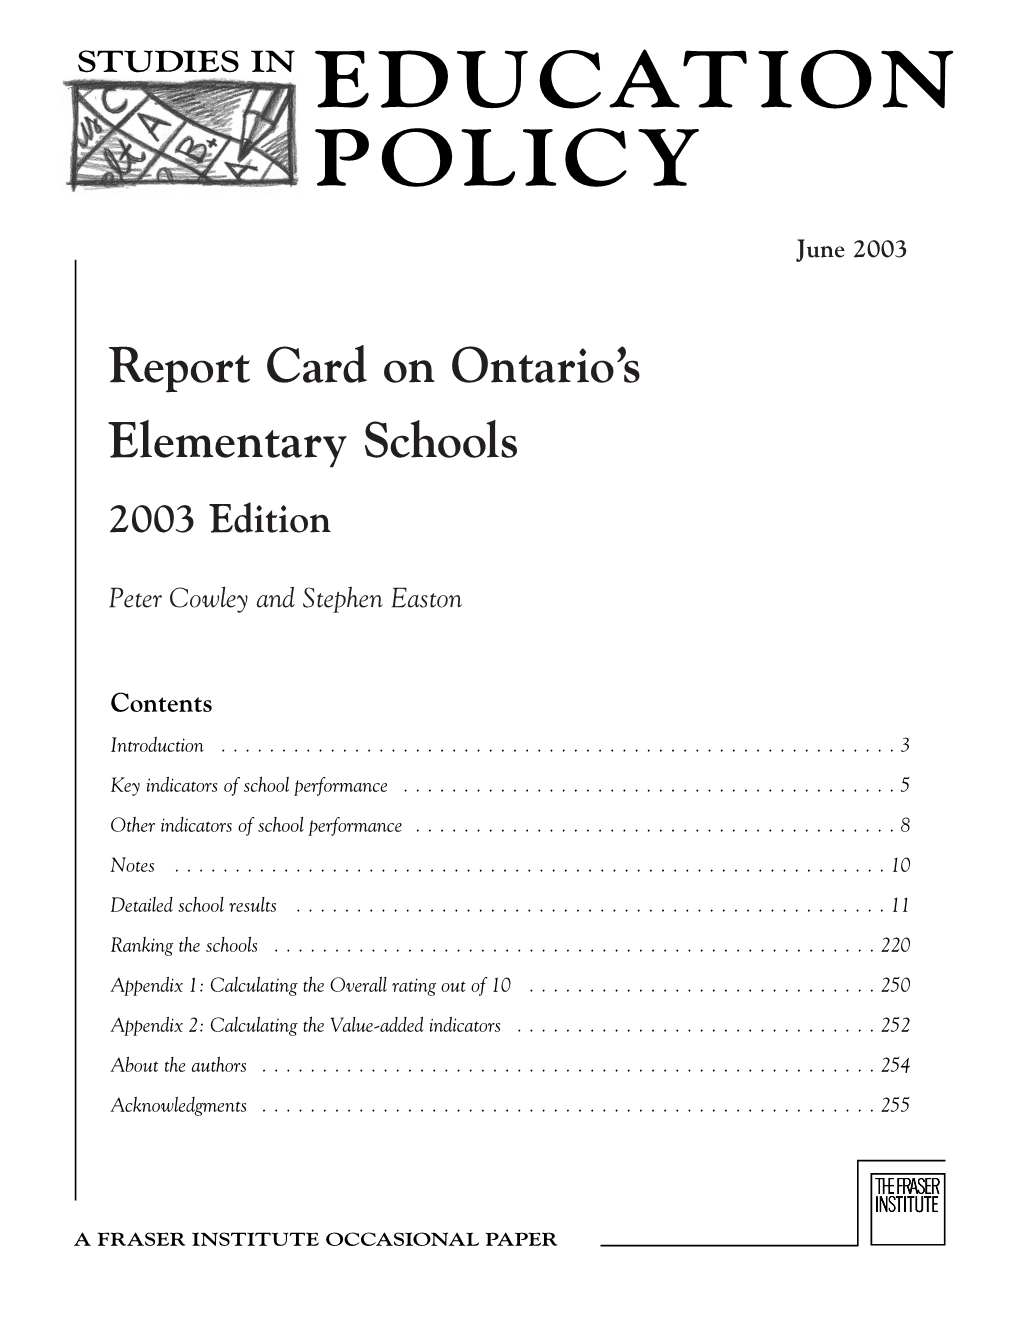 Read the Full Report Card